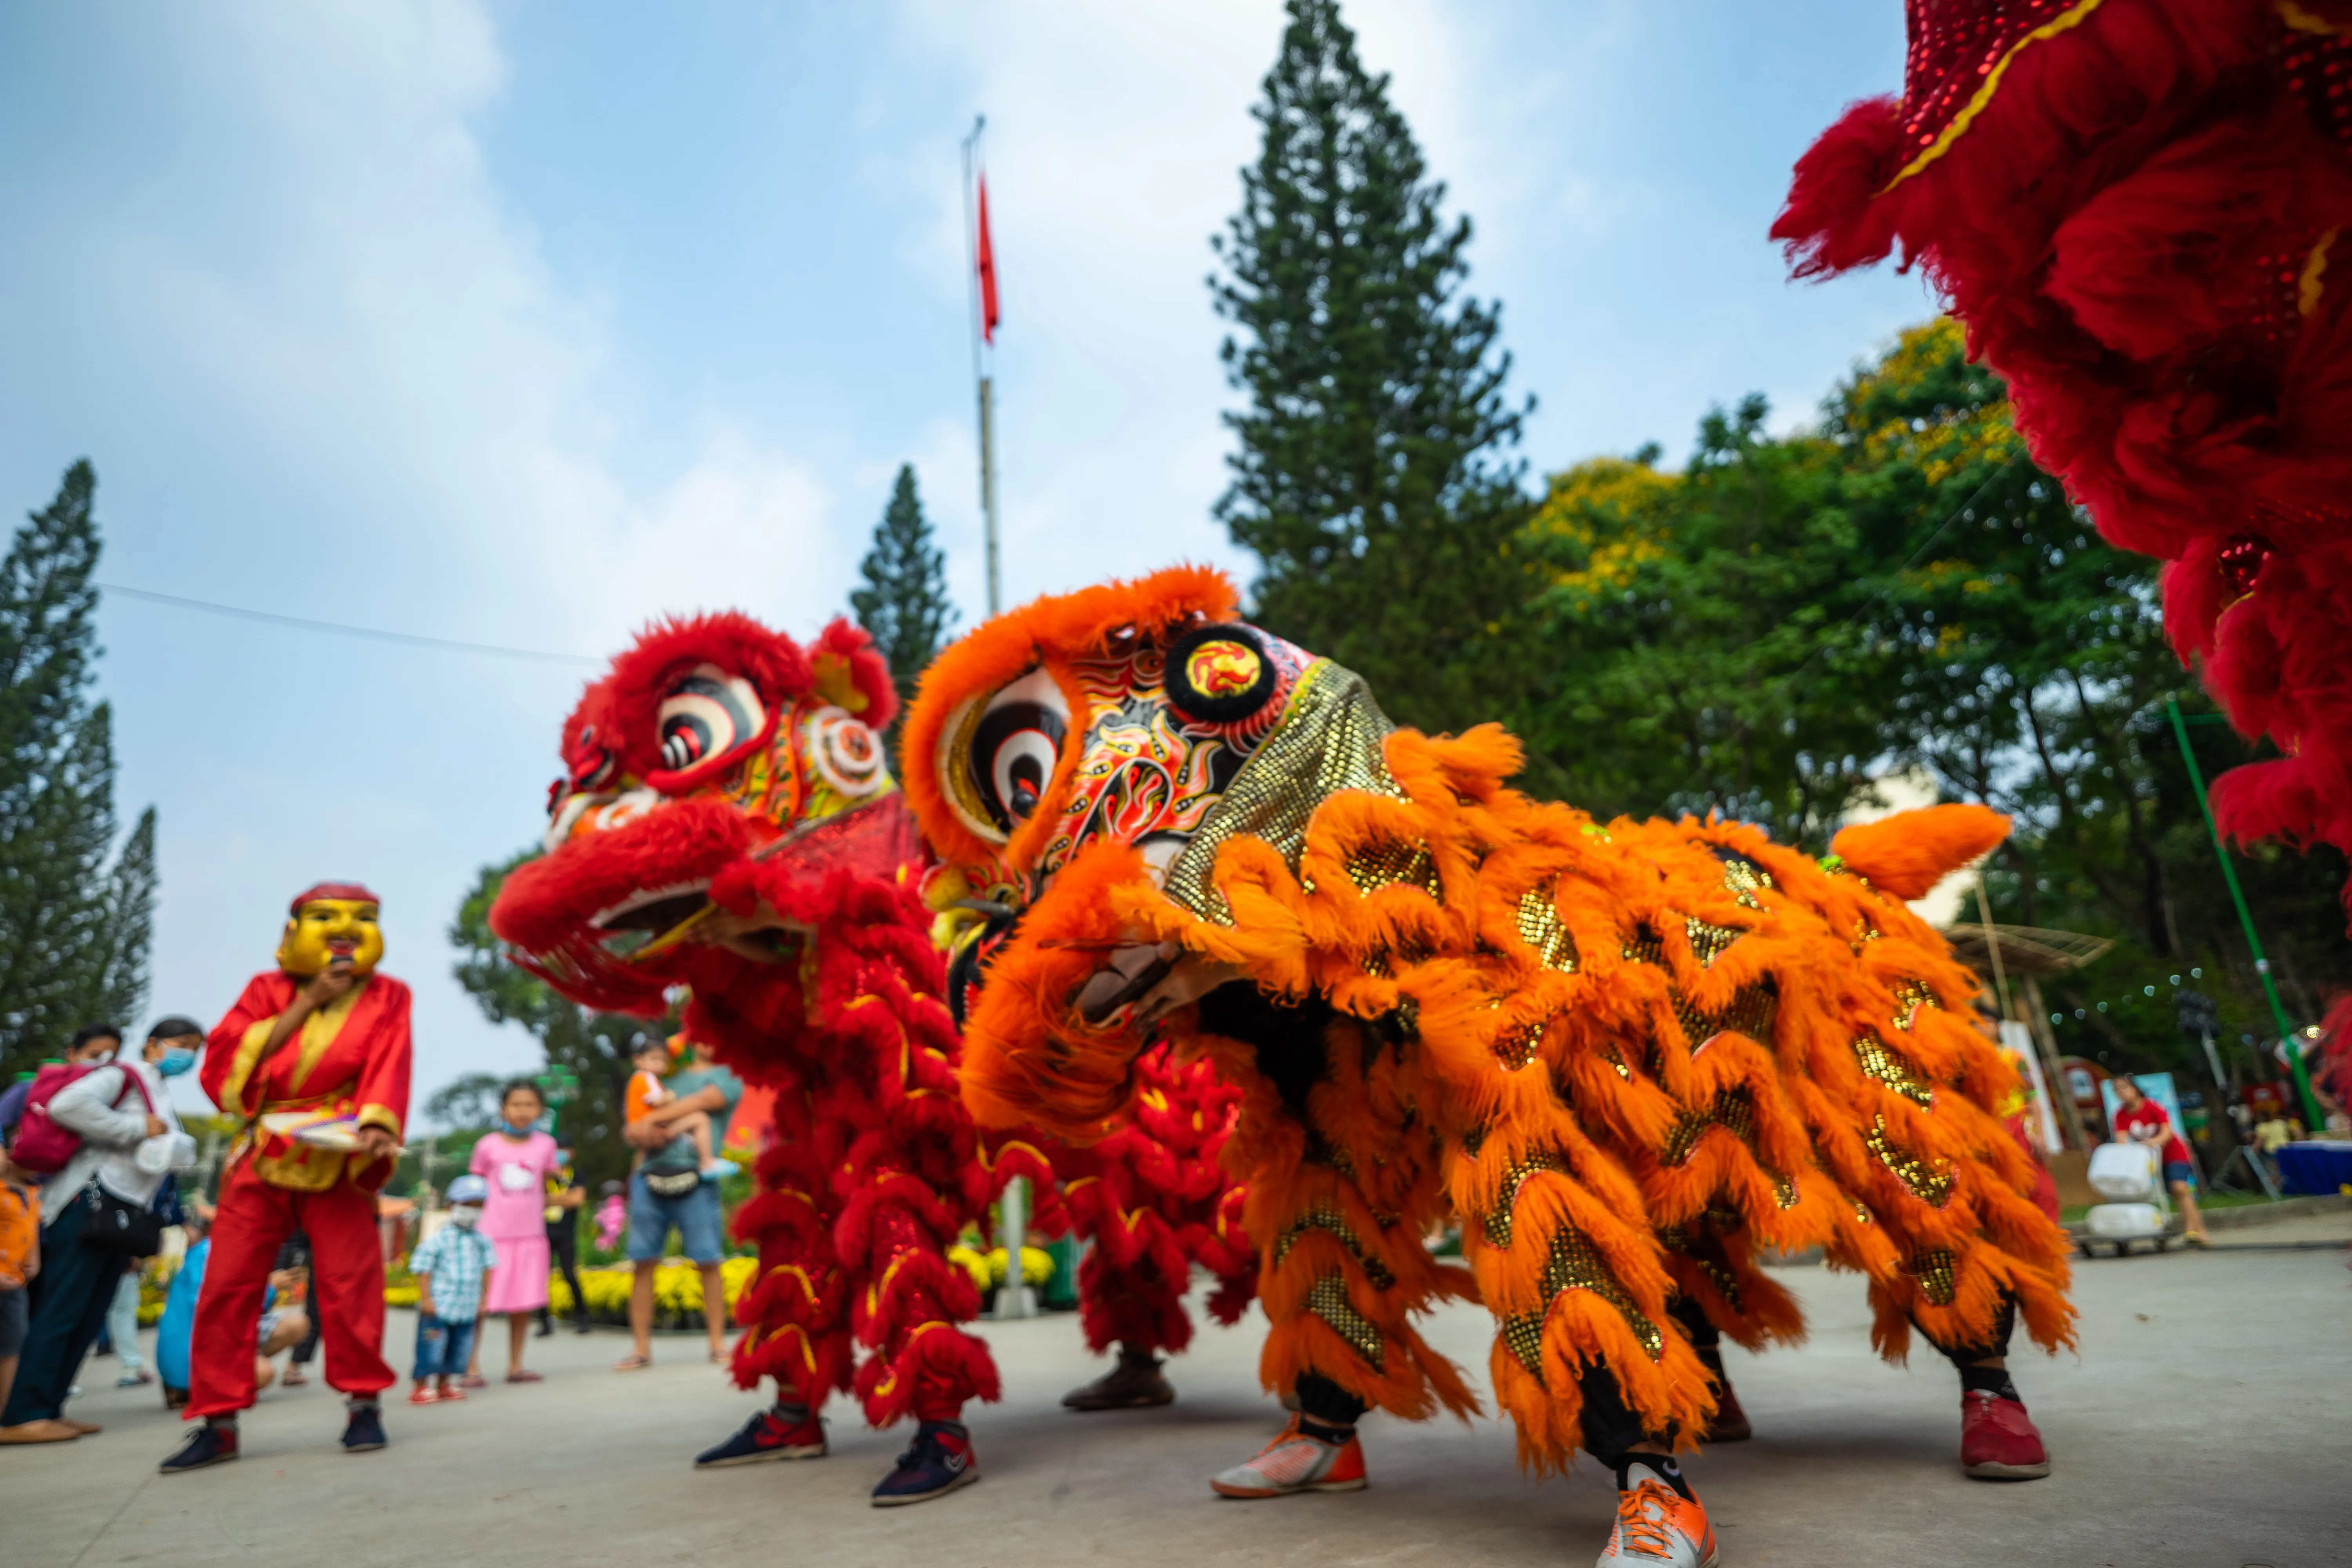 Do or watch the dragon dance this Chinese New Year as if you are attending a lantern festival